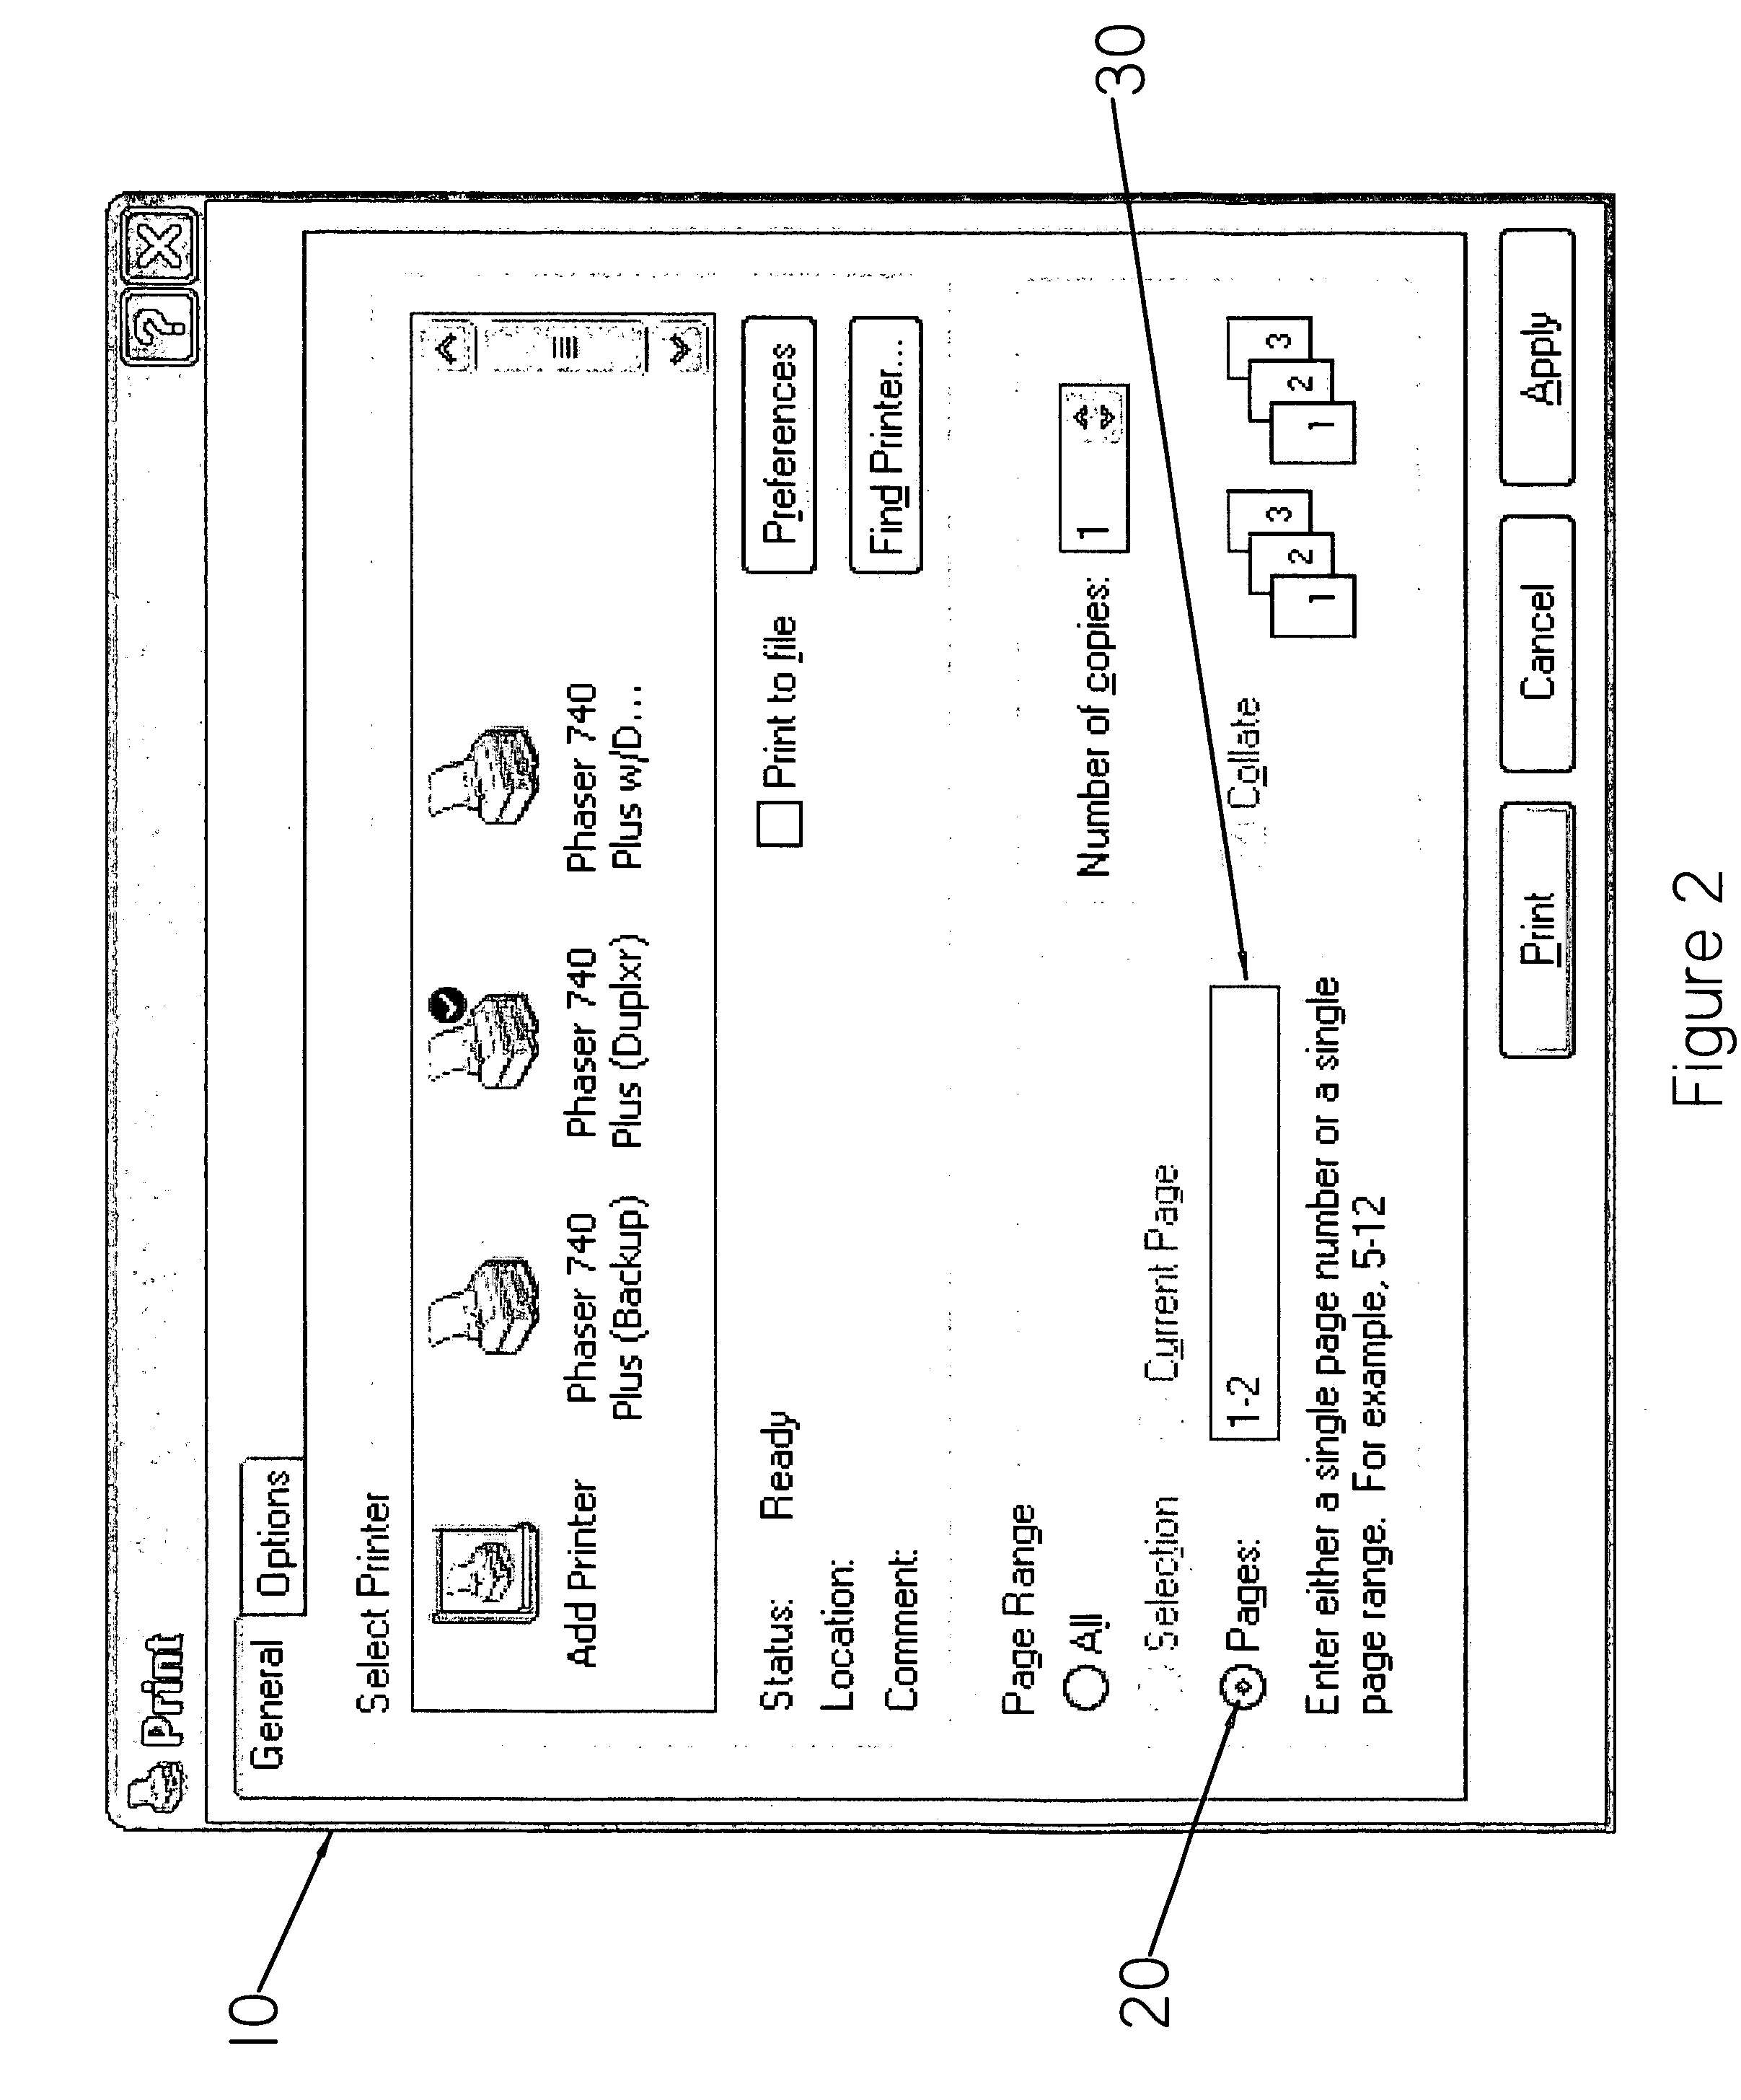 Method of limiting amount of waste paper generated from printed documents